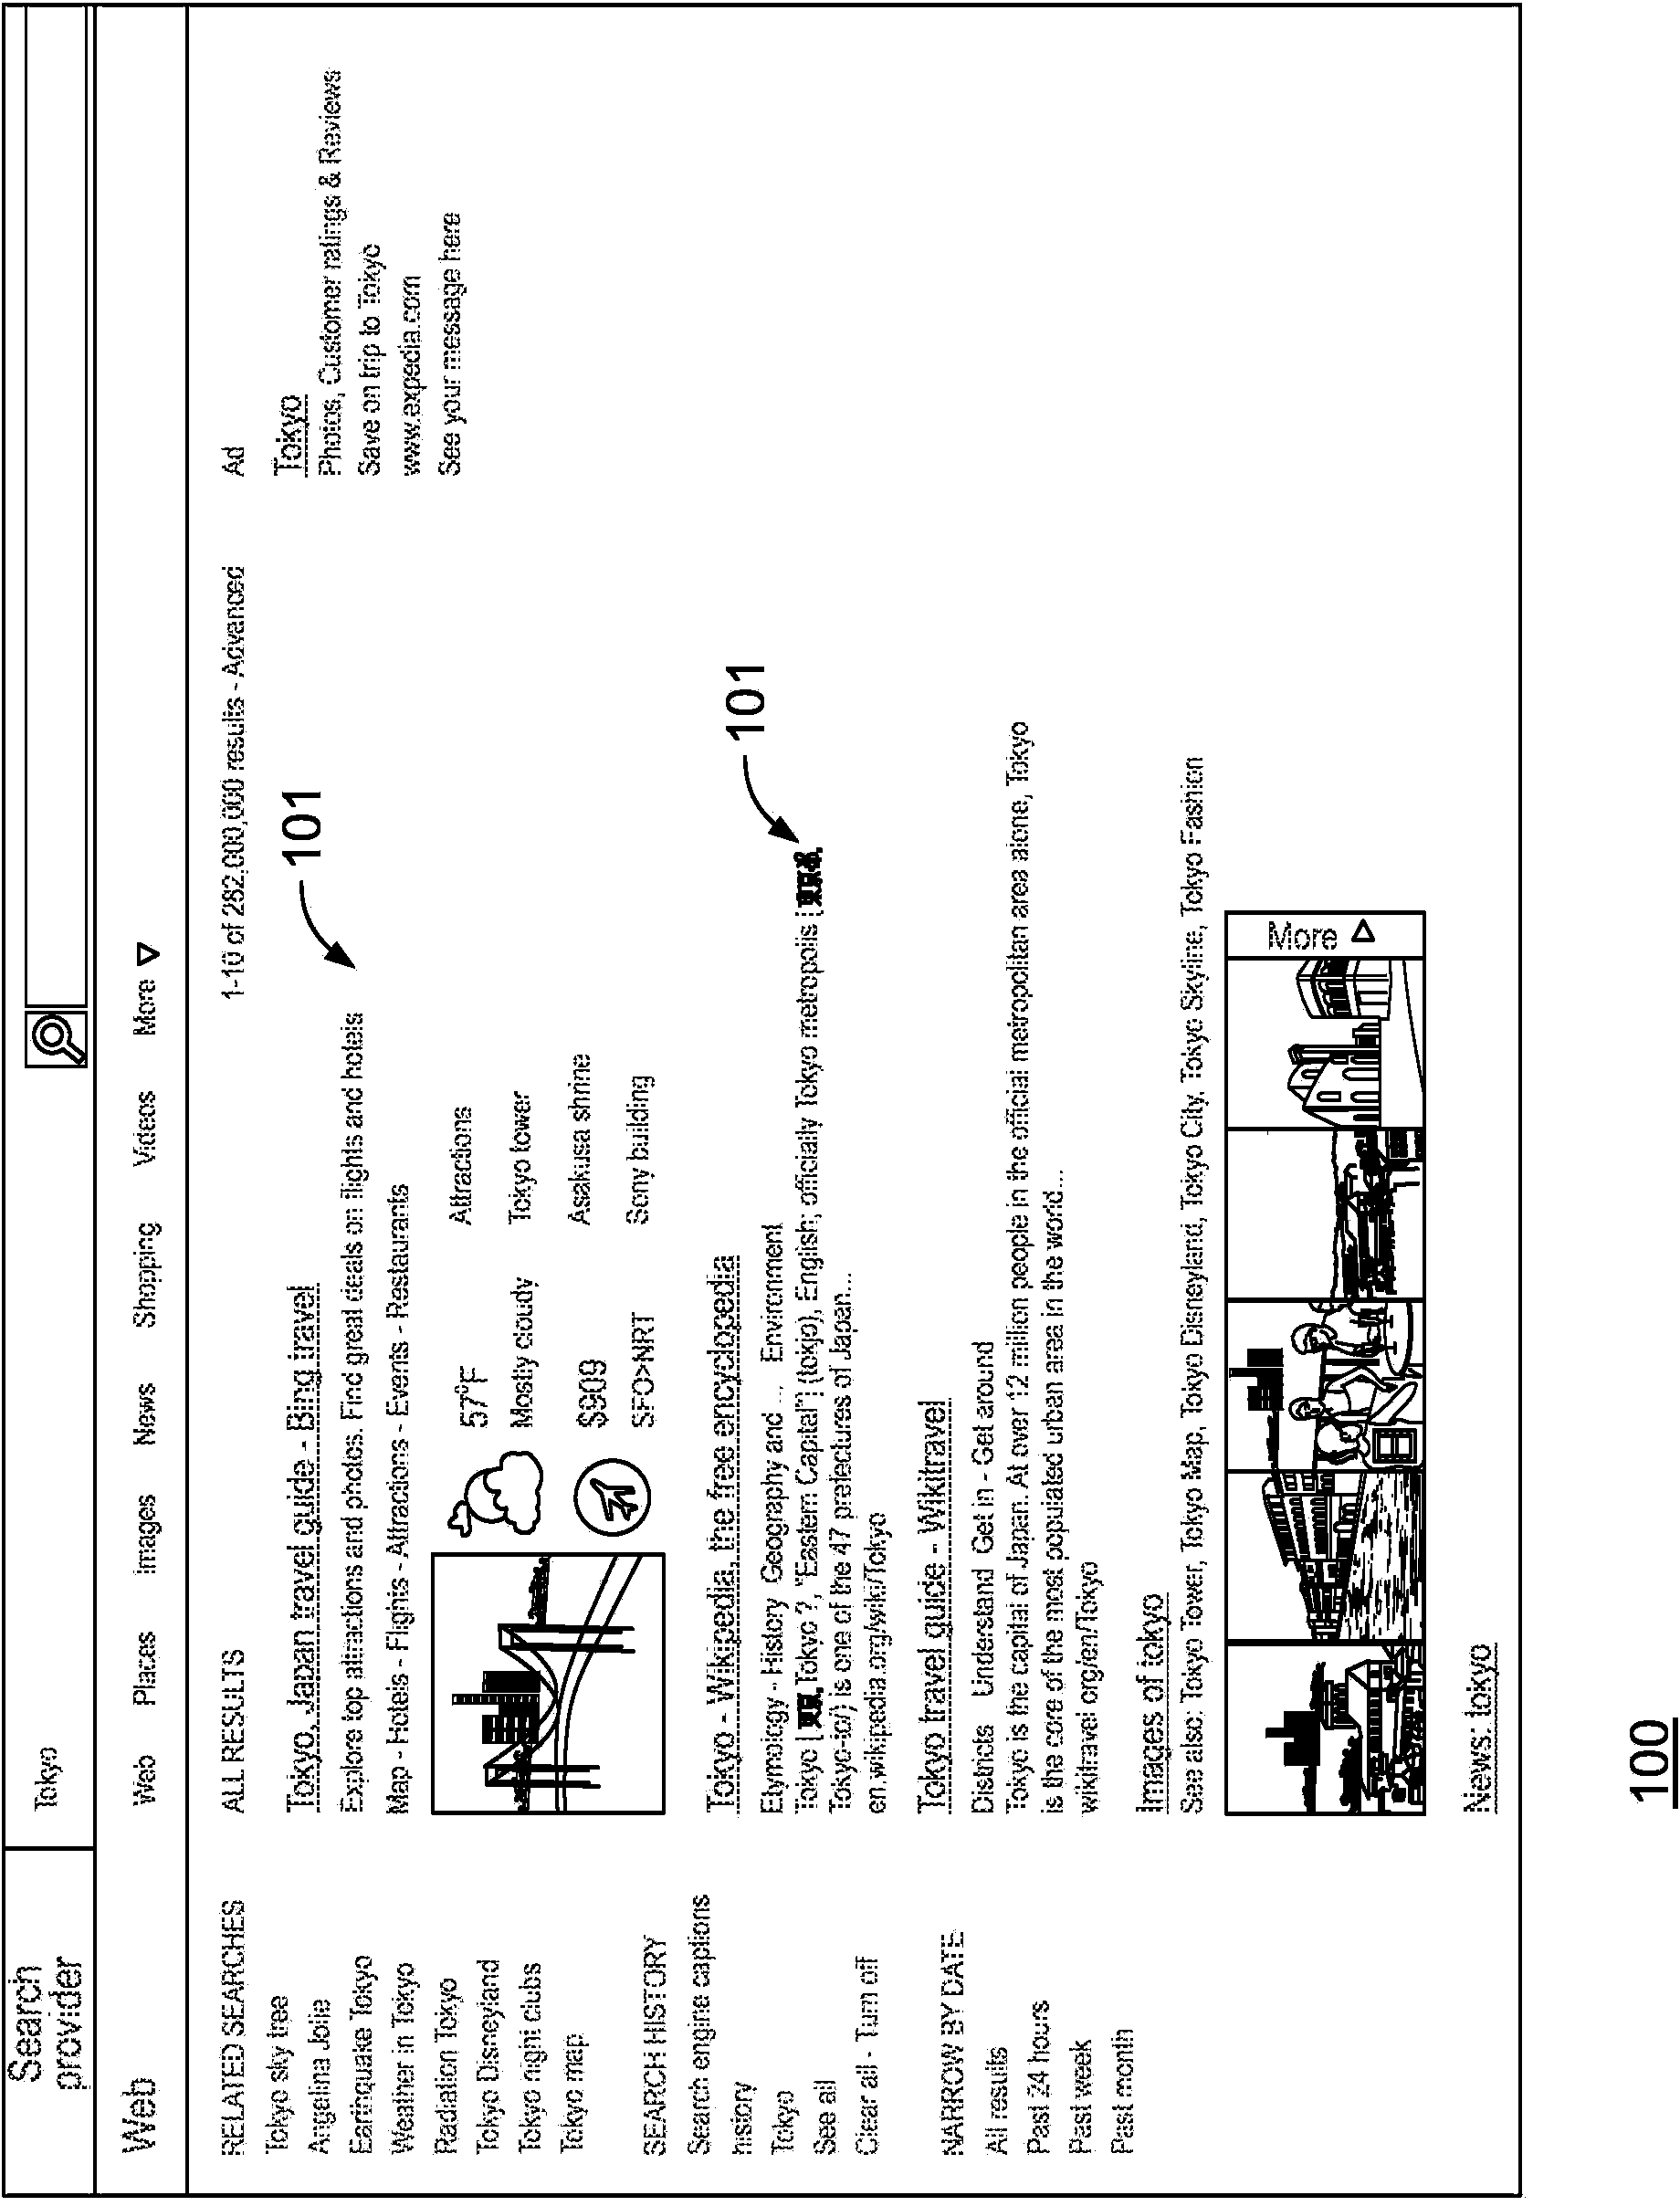 Systems and methods involving features of seach and/or search integration